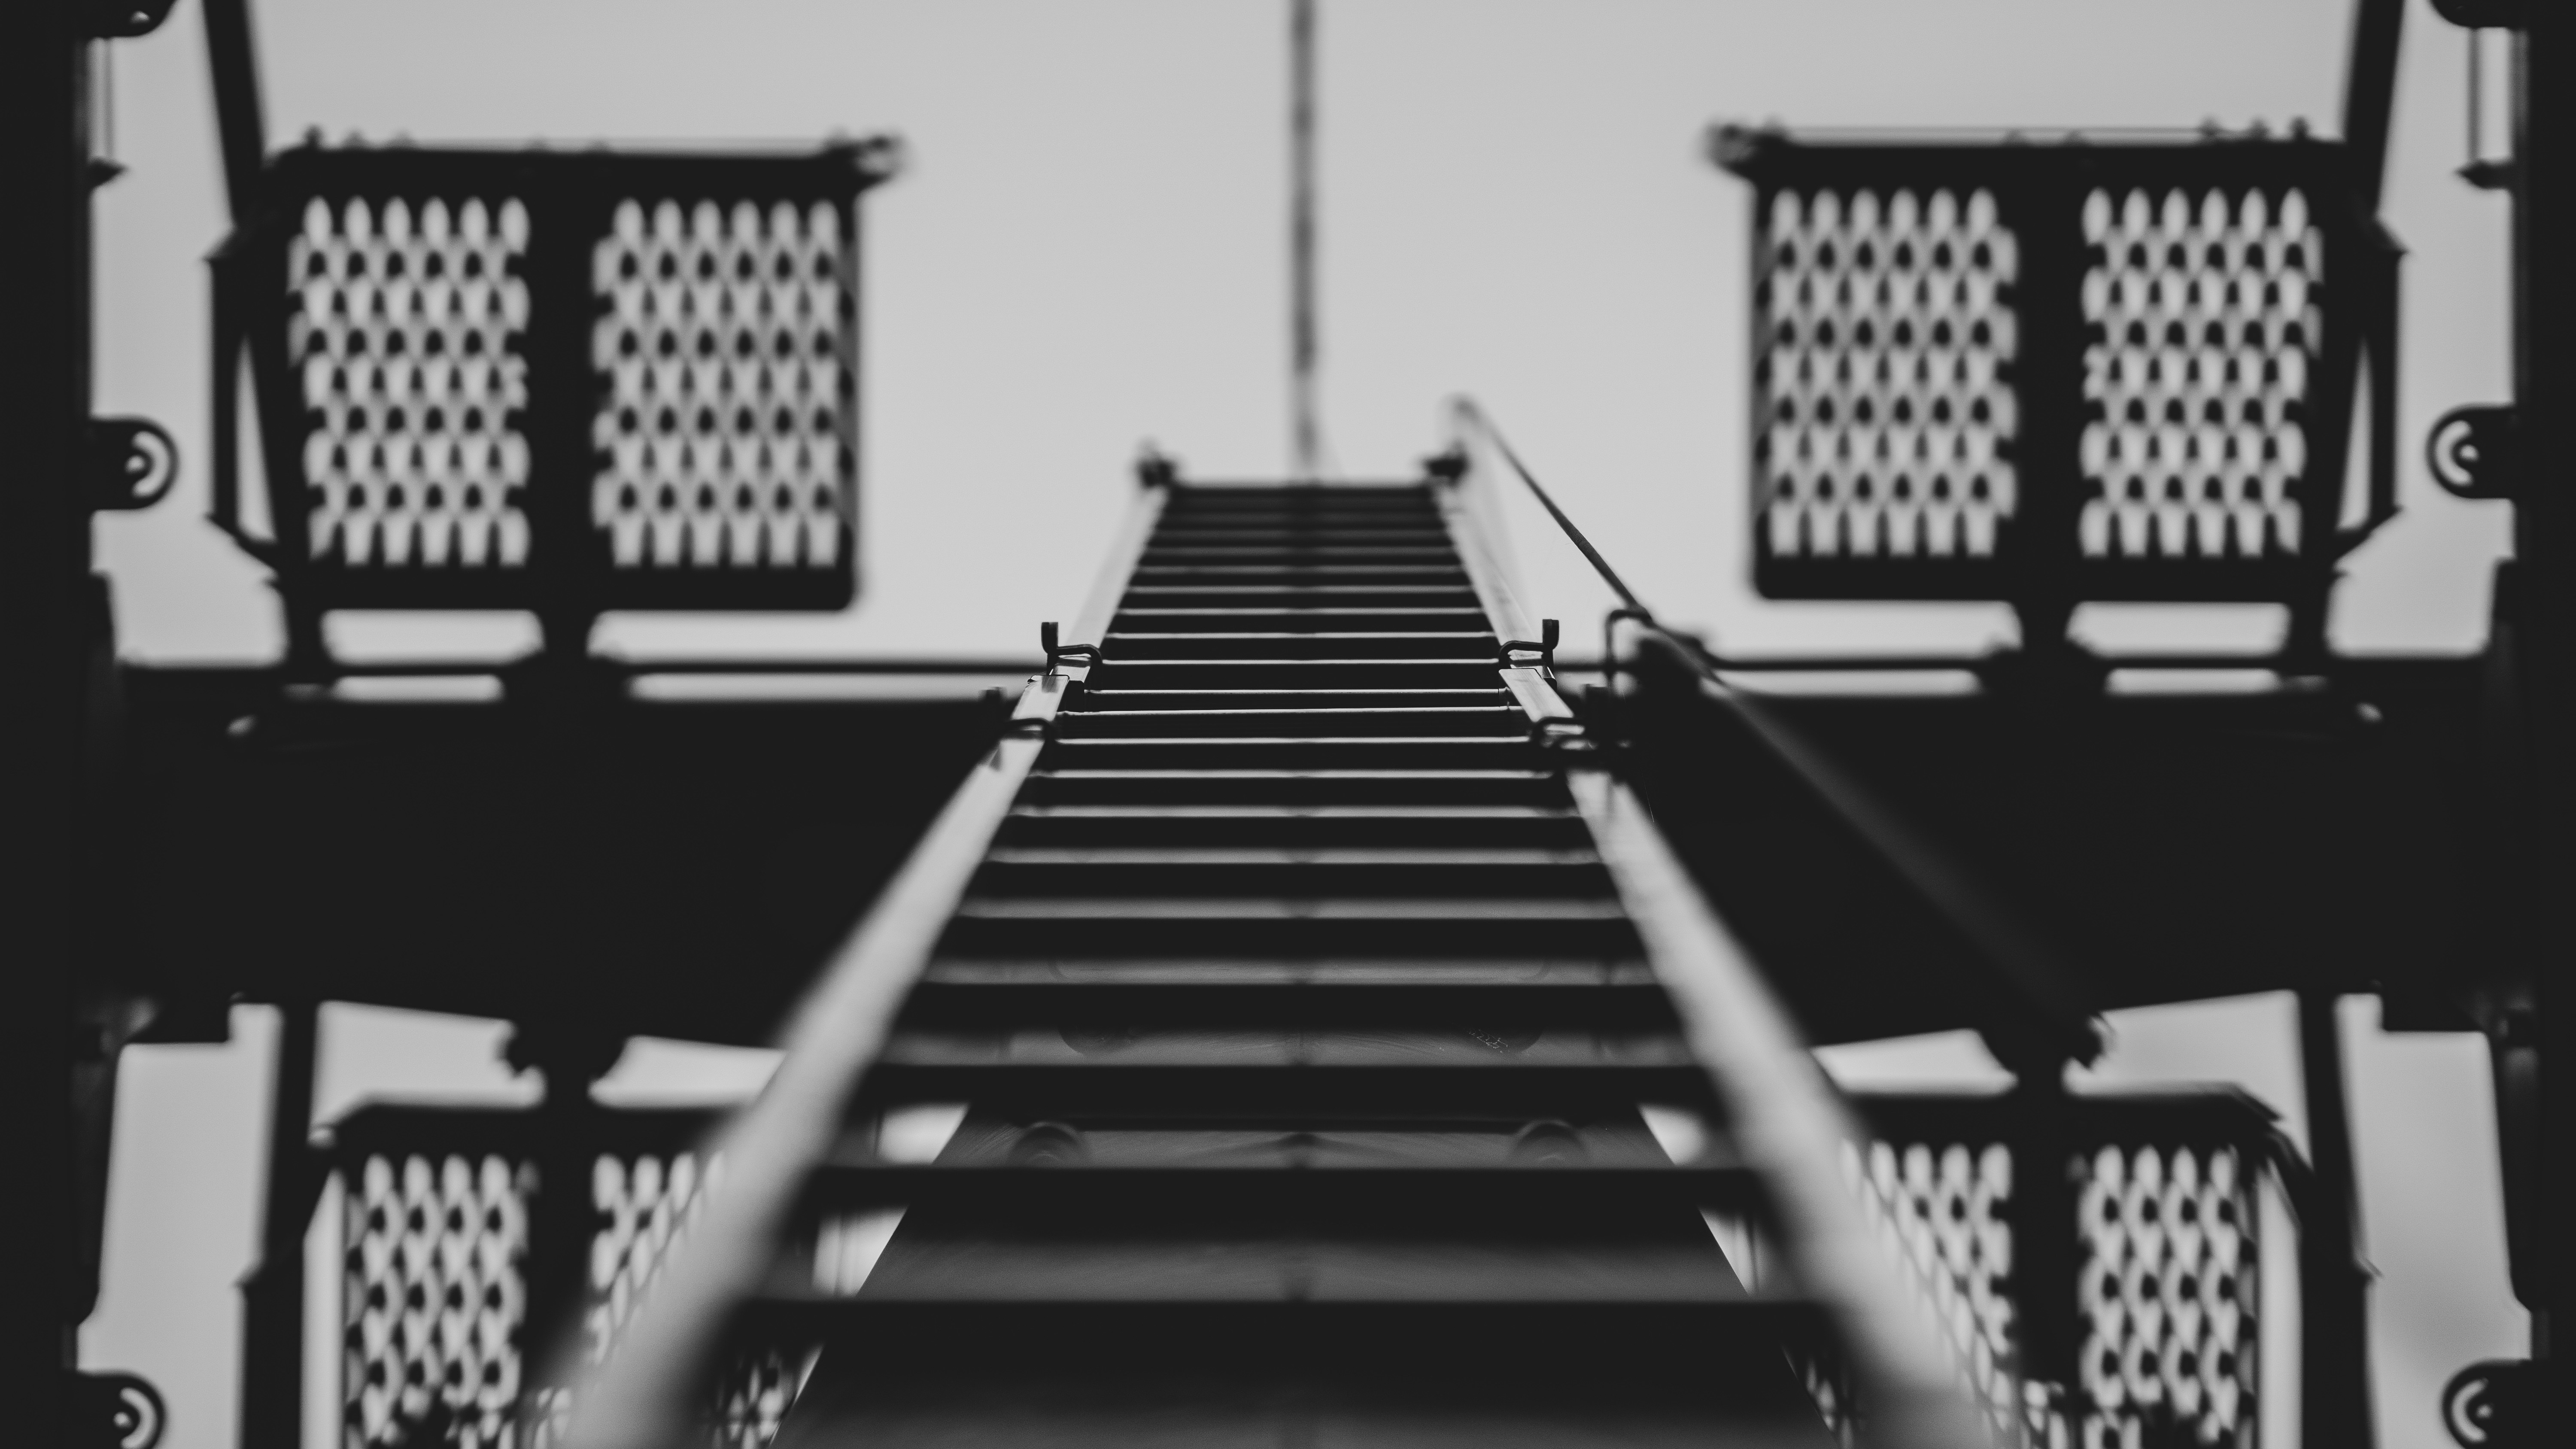 Sales Transformation: The Ladder to Organizational Success